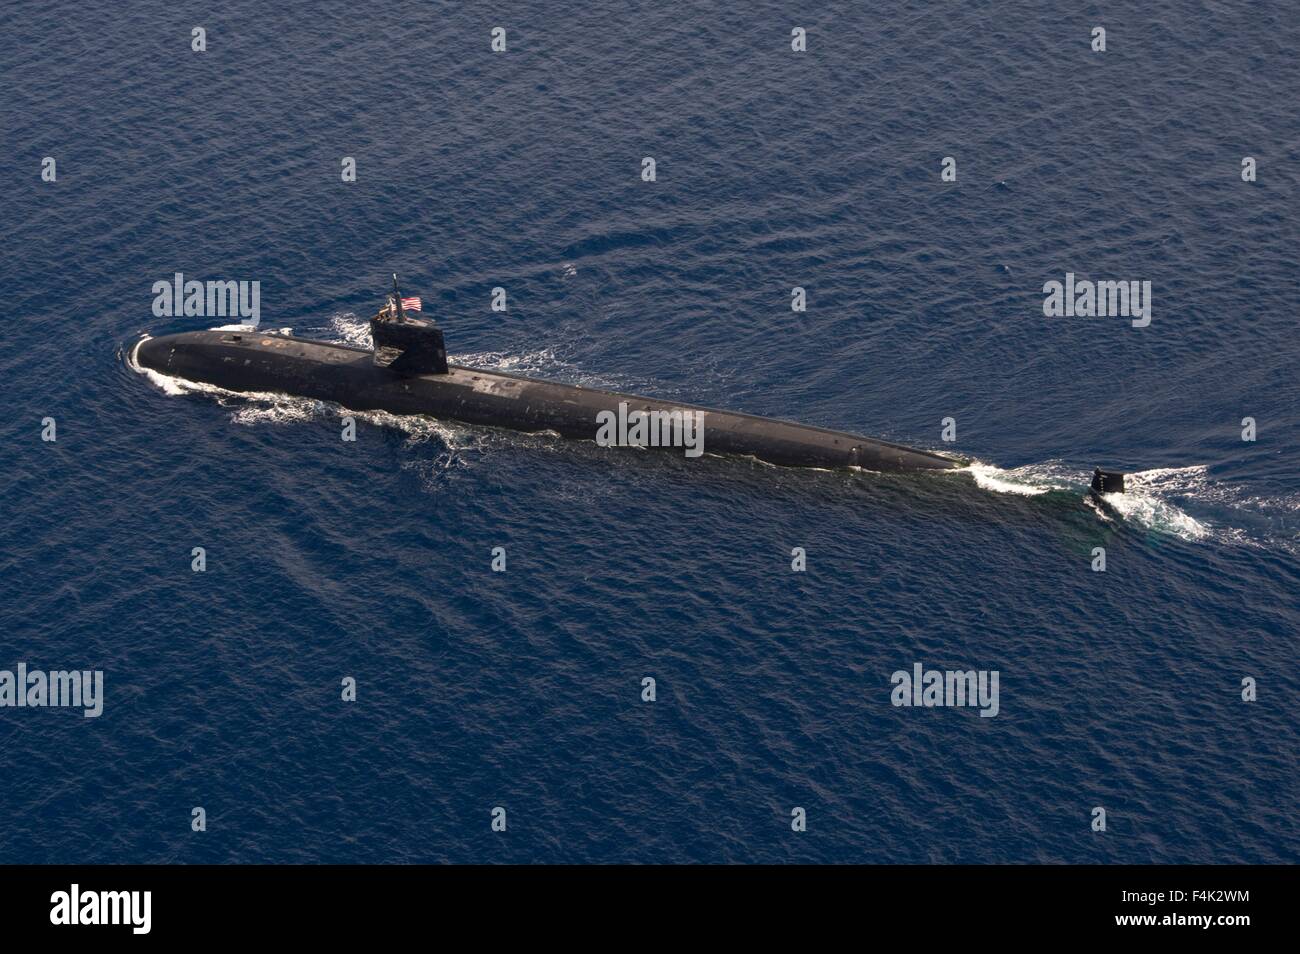 US Navy The Los Angeles-class attack submarine USS City of Corpus Christi during Exercise Malabar October 16, 2015 in the Indian Ocean. Stock Photo